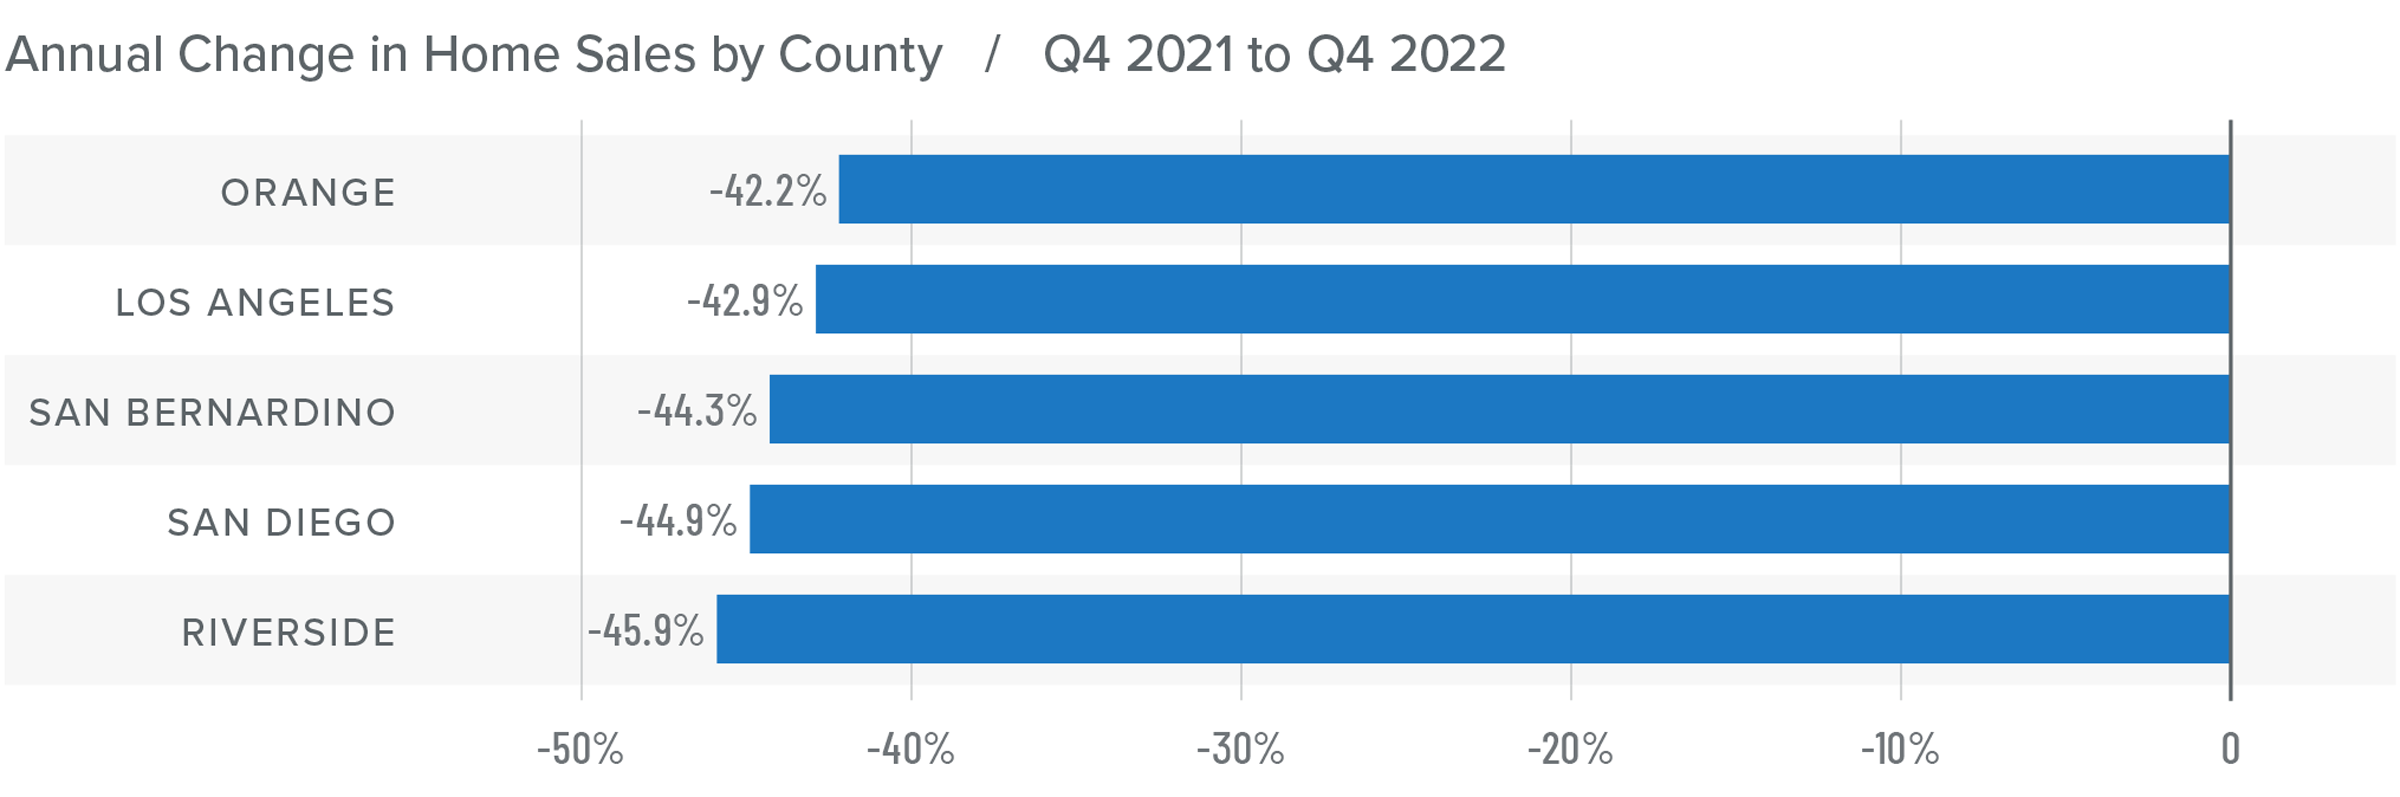 A bar graph showing the annual change in home sales for various counties in Southern California from Q4 2021 to Q4 2022. All counties have a negative percentage year-over-year change. Here are the totals: Orange at -42.2%, Los Angeles at -42.9%, San Bernardino -44.3%, San Diego -44.9%, and Riverside -45.9%.